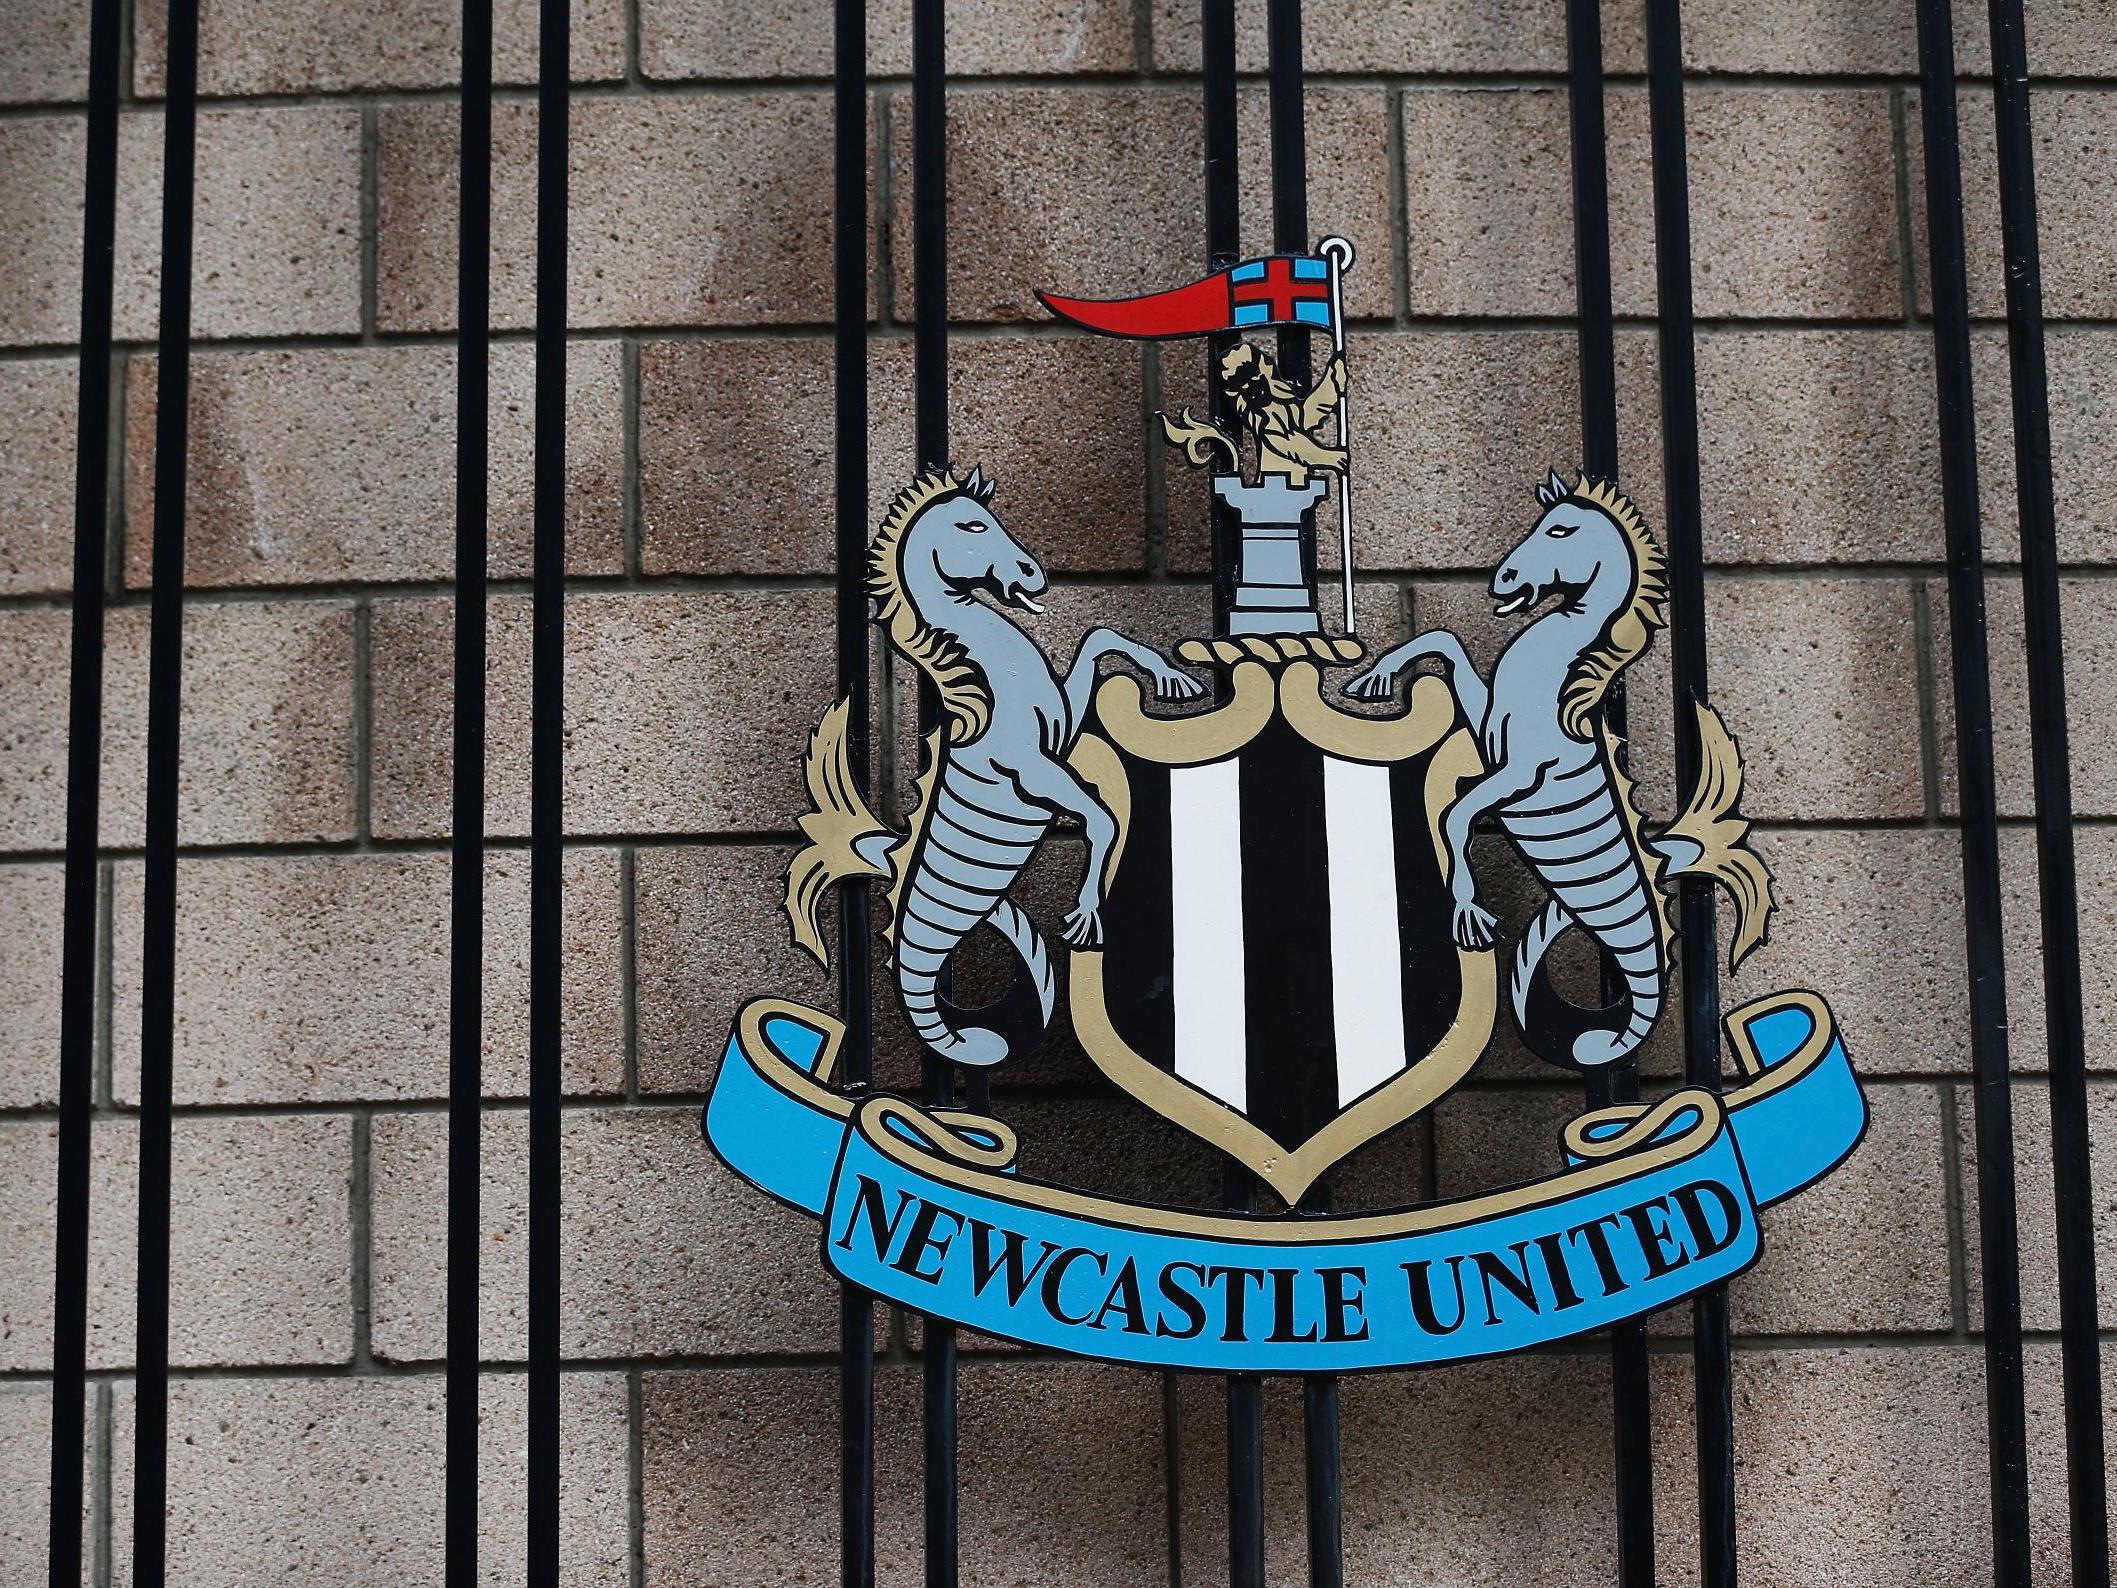 The takeover will see Newcastle fall into Saudi Arabian ownership